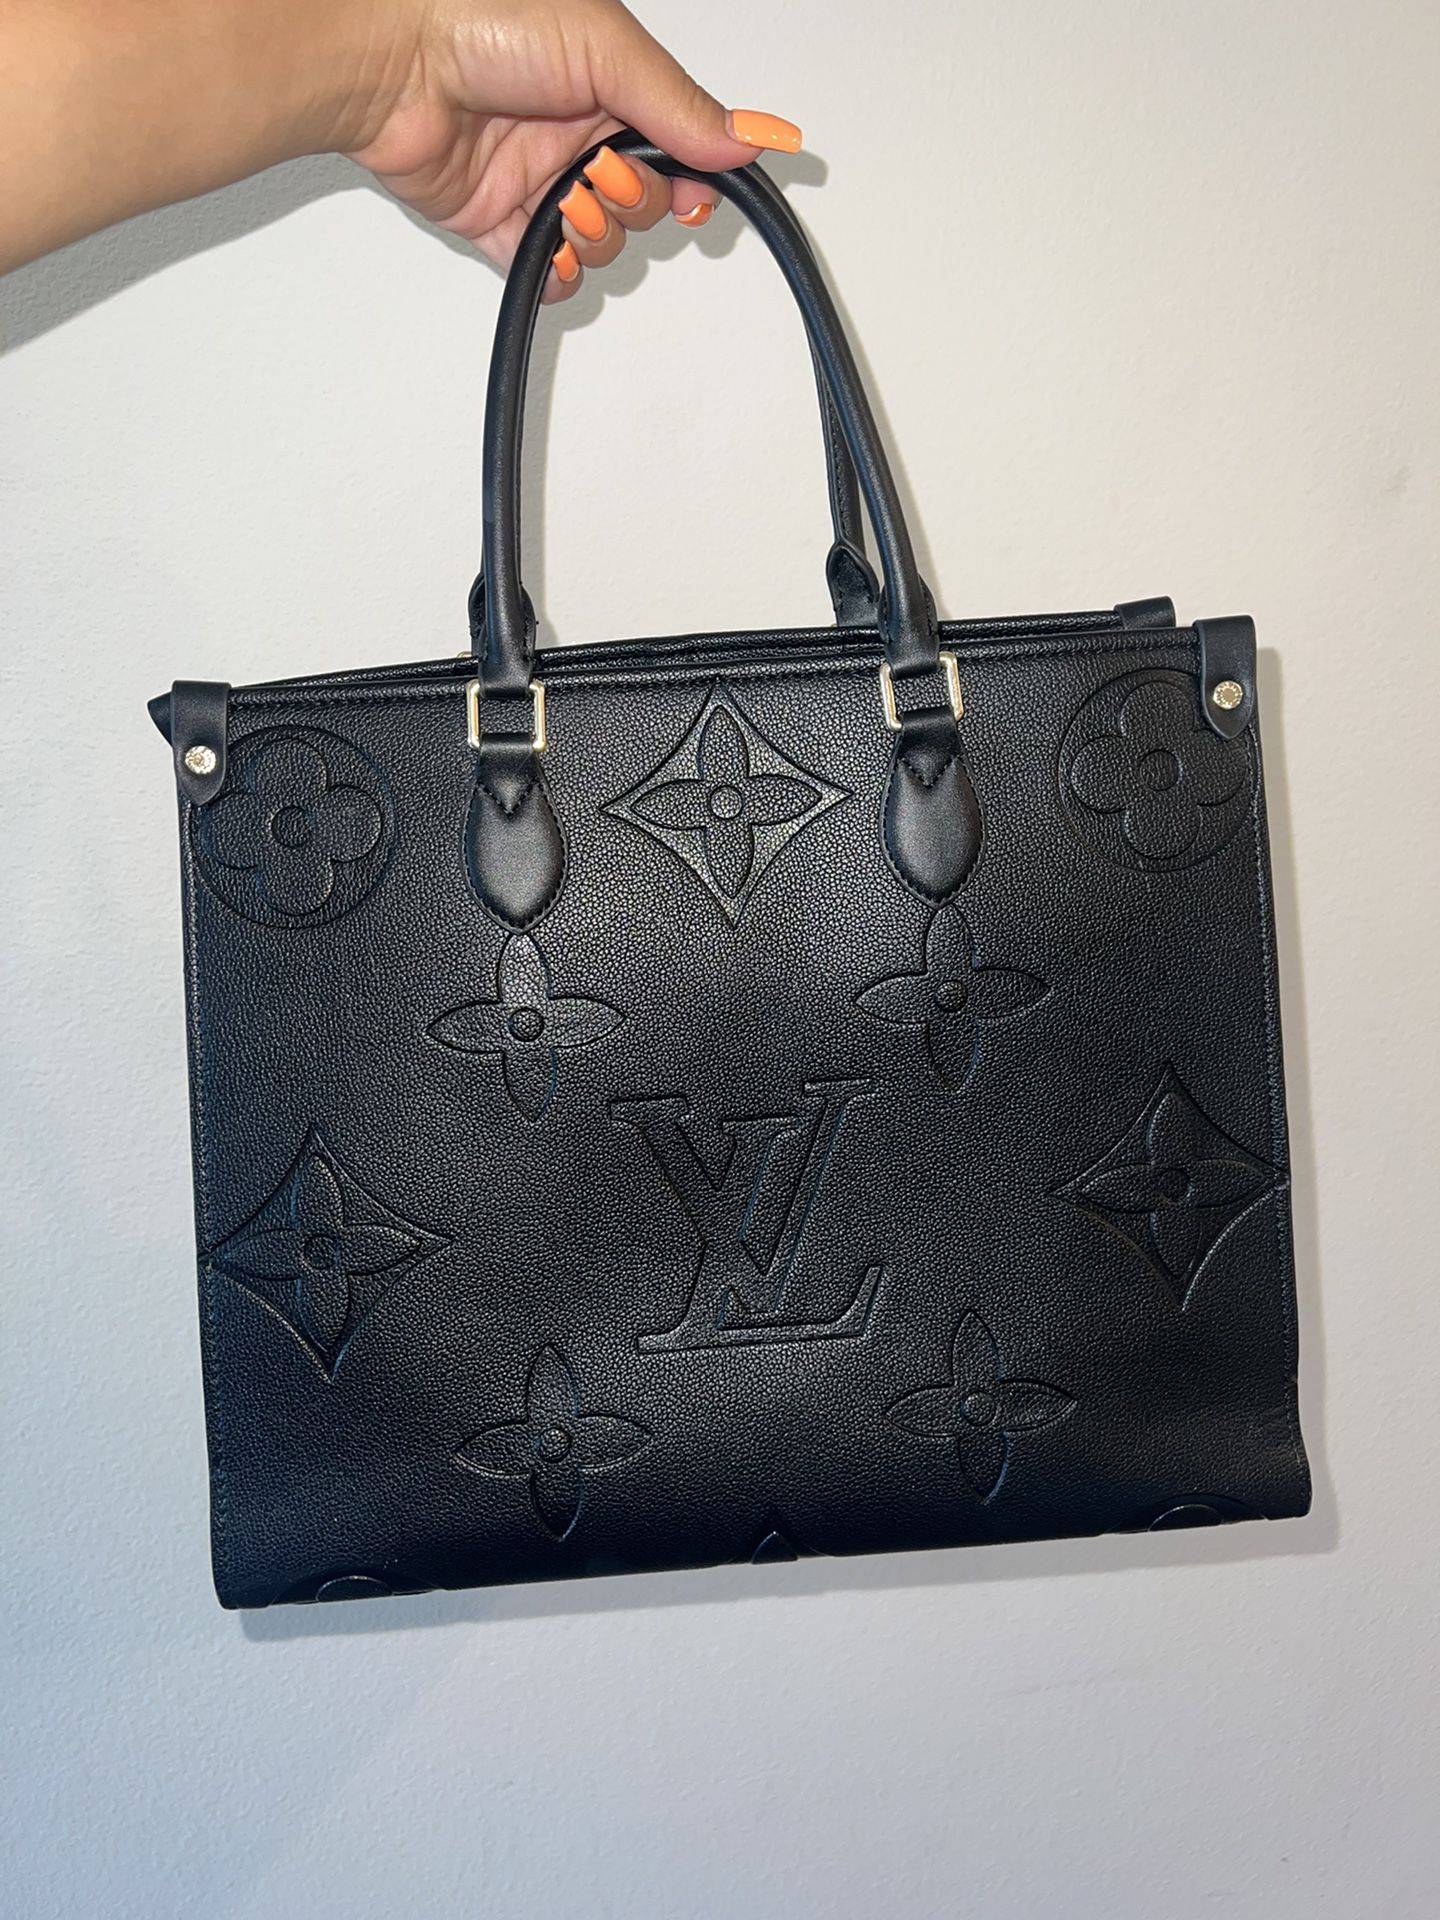 Replica Louis Vuitton Backpack for sale in Anaheim, CA - 5miles